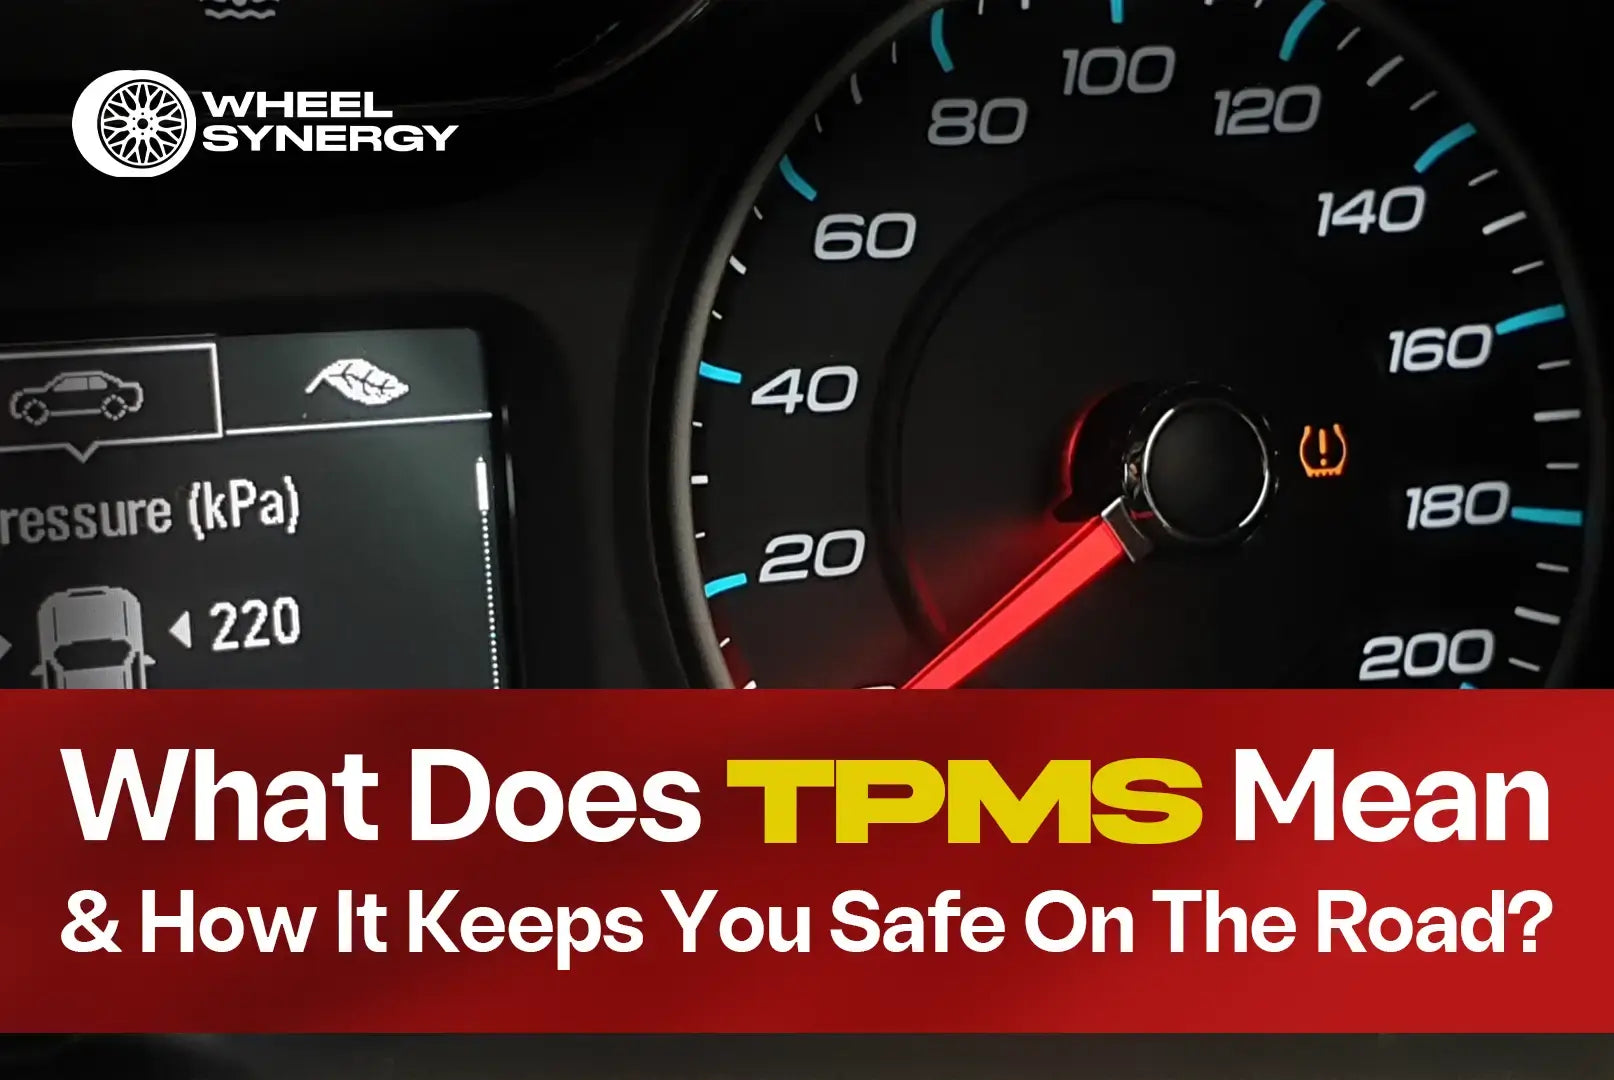 WHAT IS TPMS & HOW DOES IT WORK?